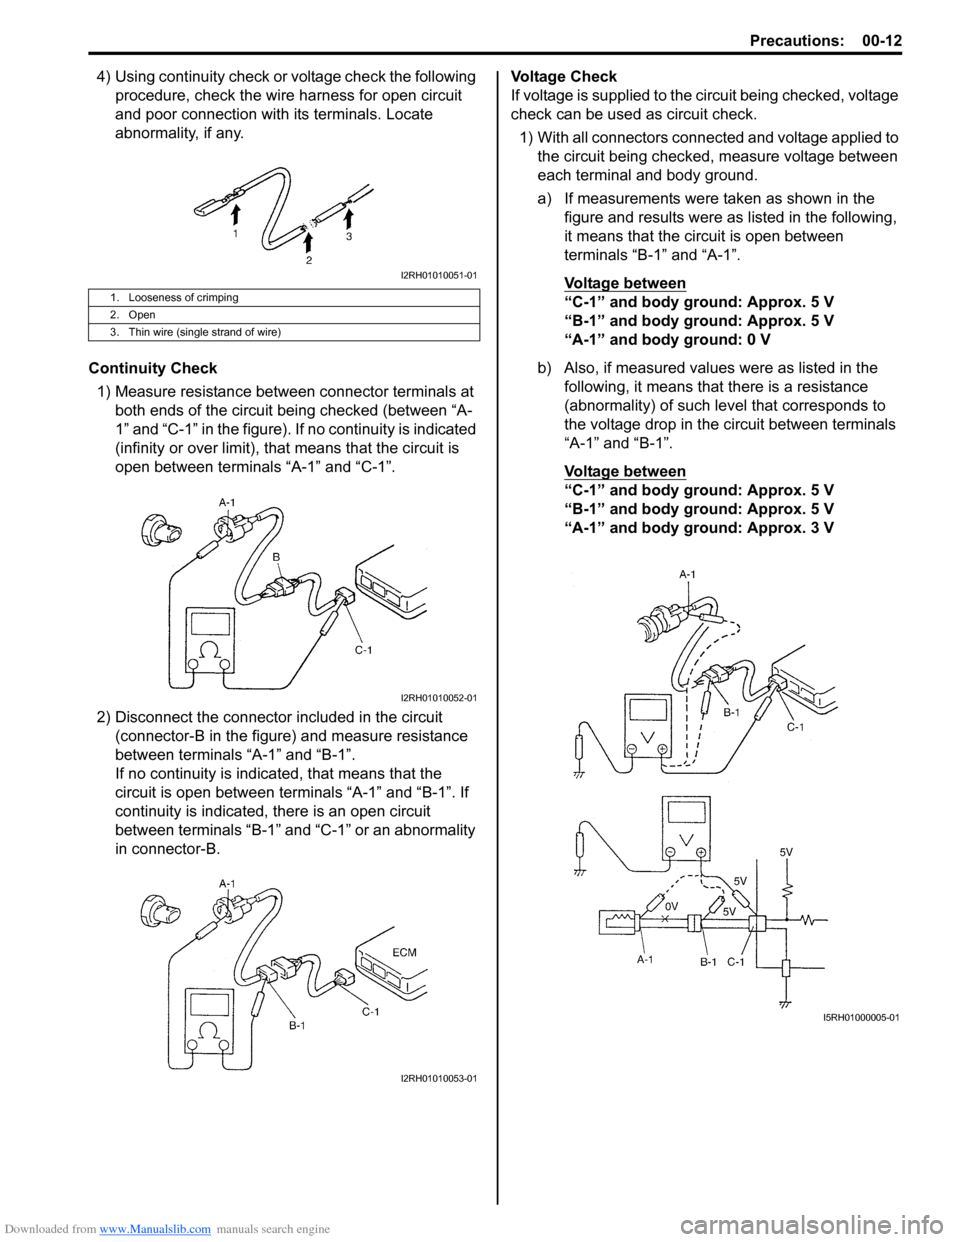 SUZUKI SWIFT 2007 2.G Service Workshop Manual Downloaded from www.Manualslib.com manuals search engine Precautions: 00-12
4) Using continuity check or voltage check the following procedure, check the wire harness for open circuit 
and poor connec